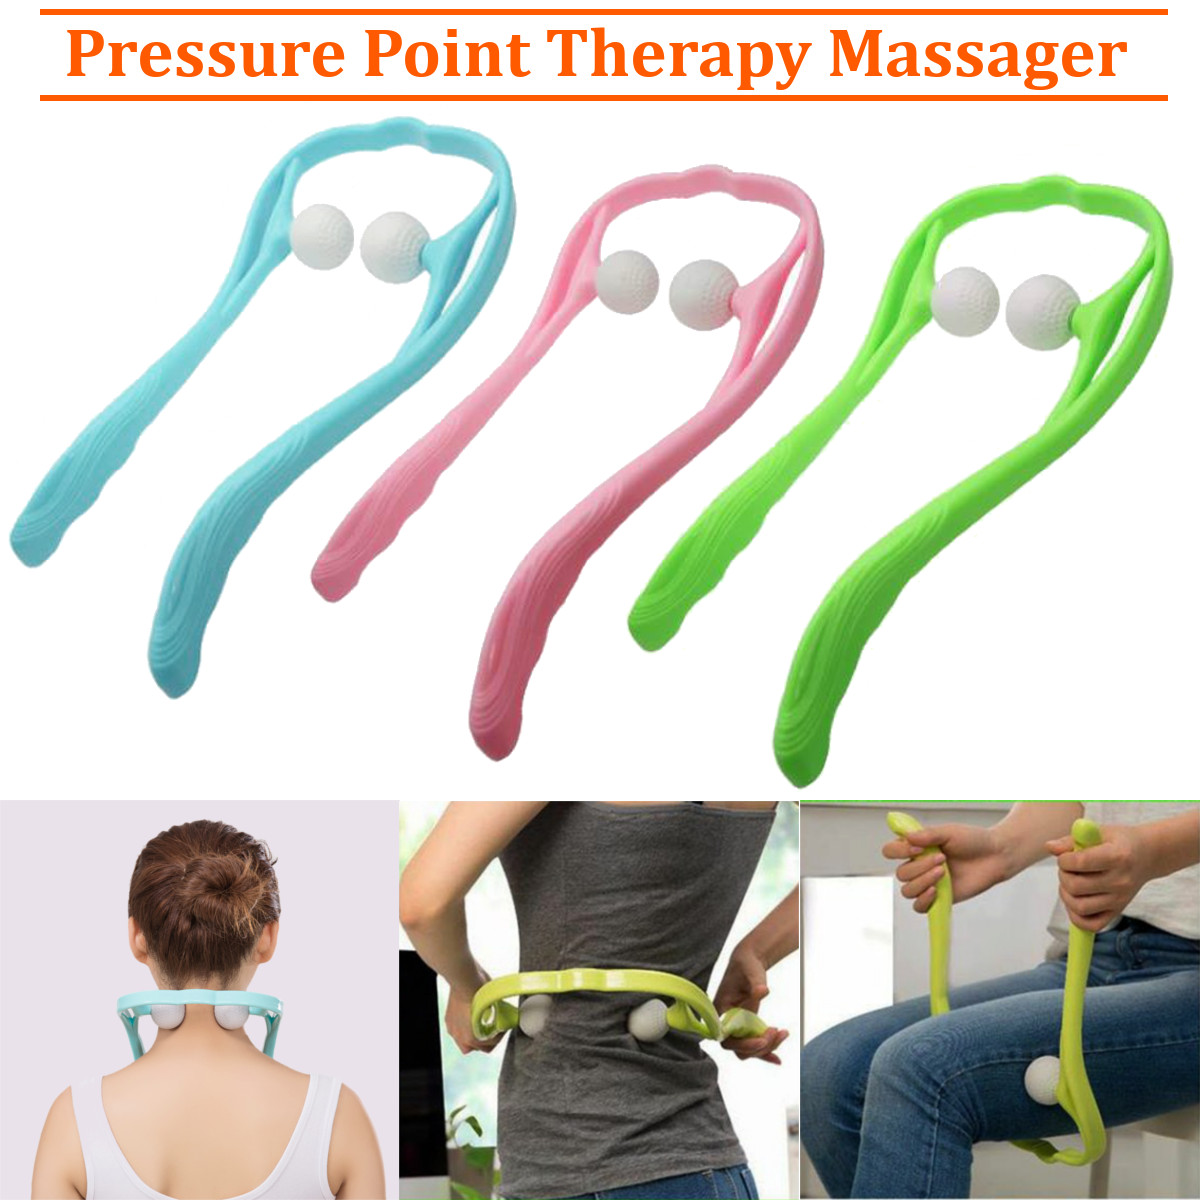 Pressure Point Therapy Massager 